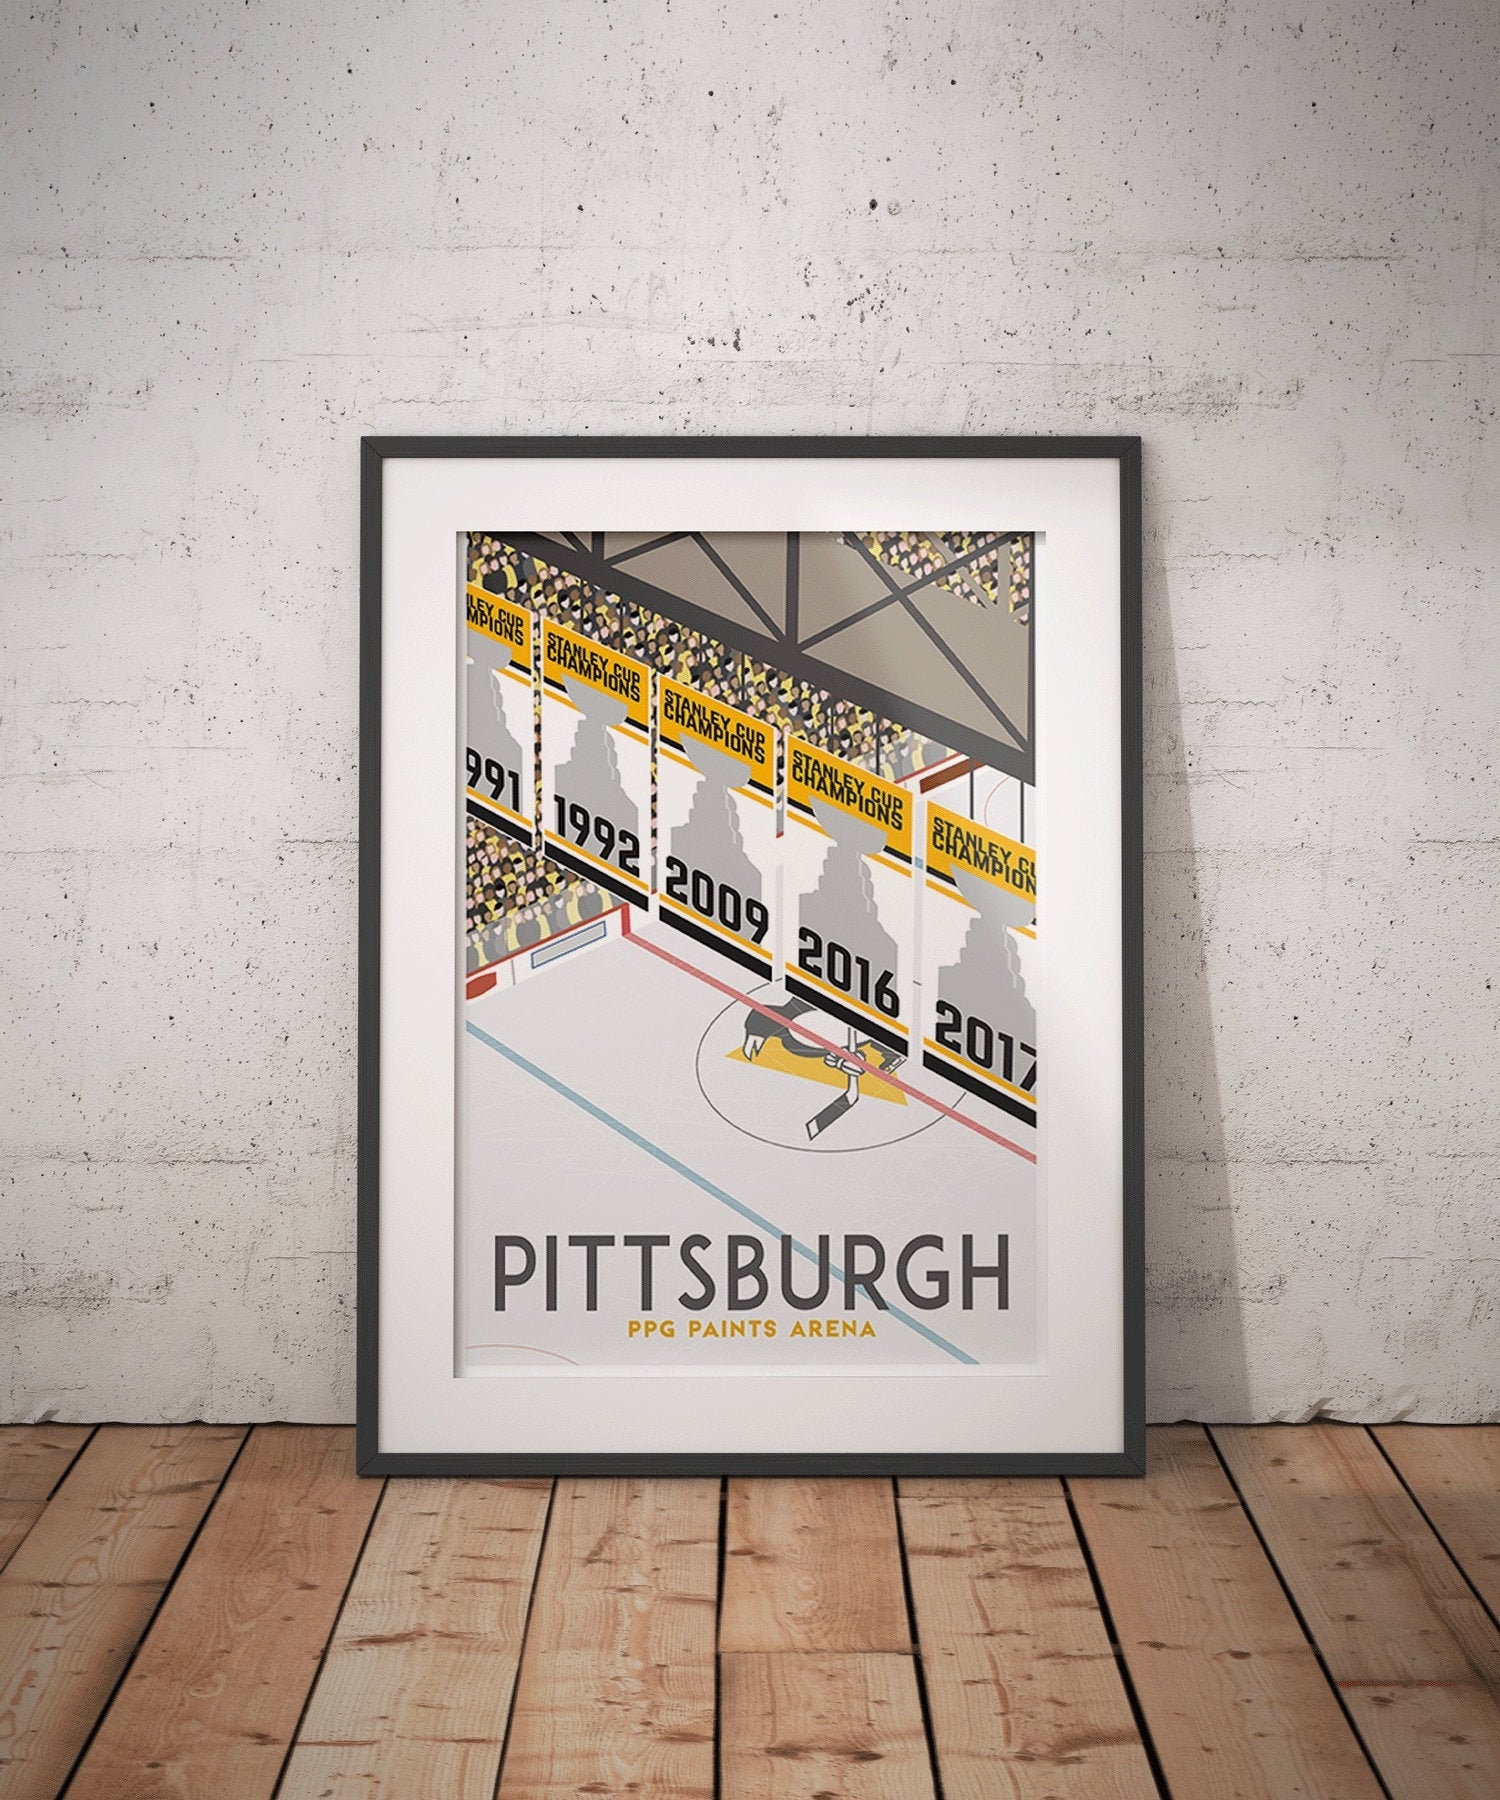 Average arena at best - Review of PPG Paints Arena, Pittsburgh, PA